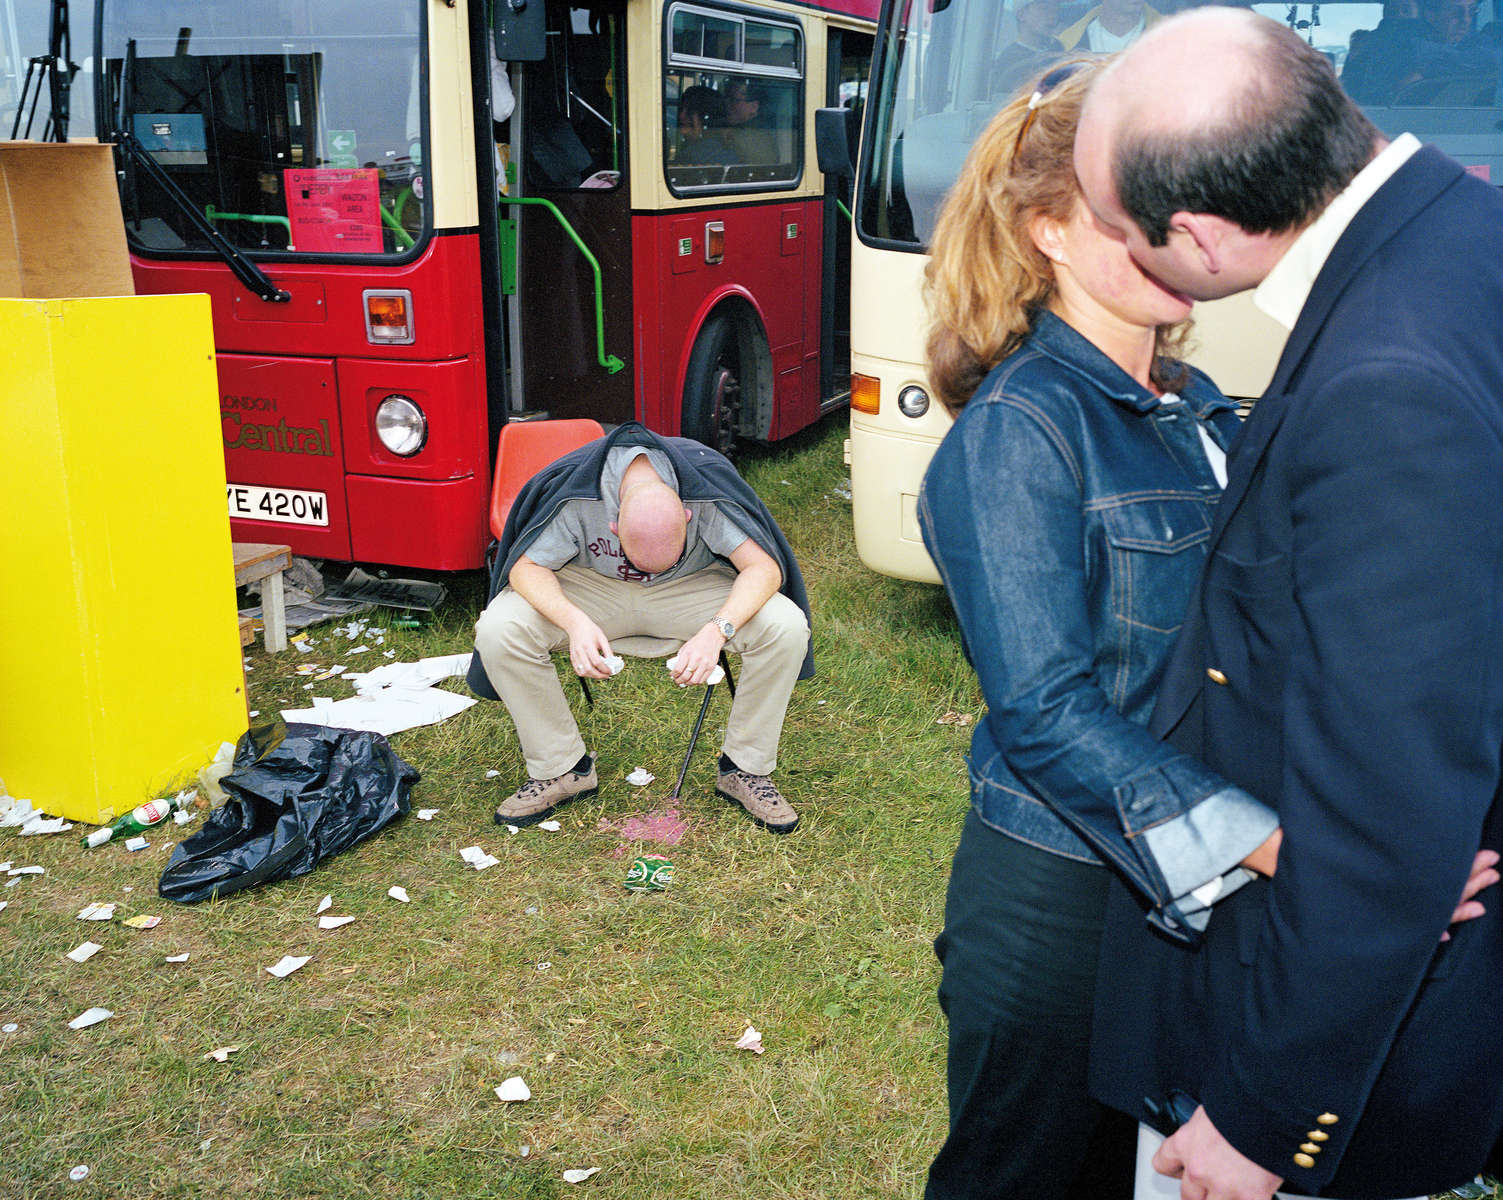 A couple kiss while a man vomits nearby on Derby Day at Epsom Downs Racecourse. June 2001